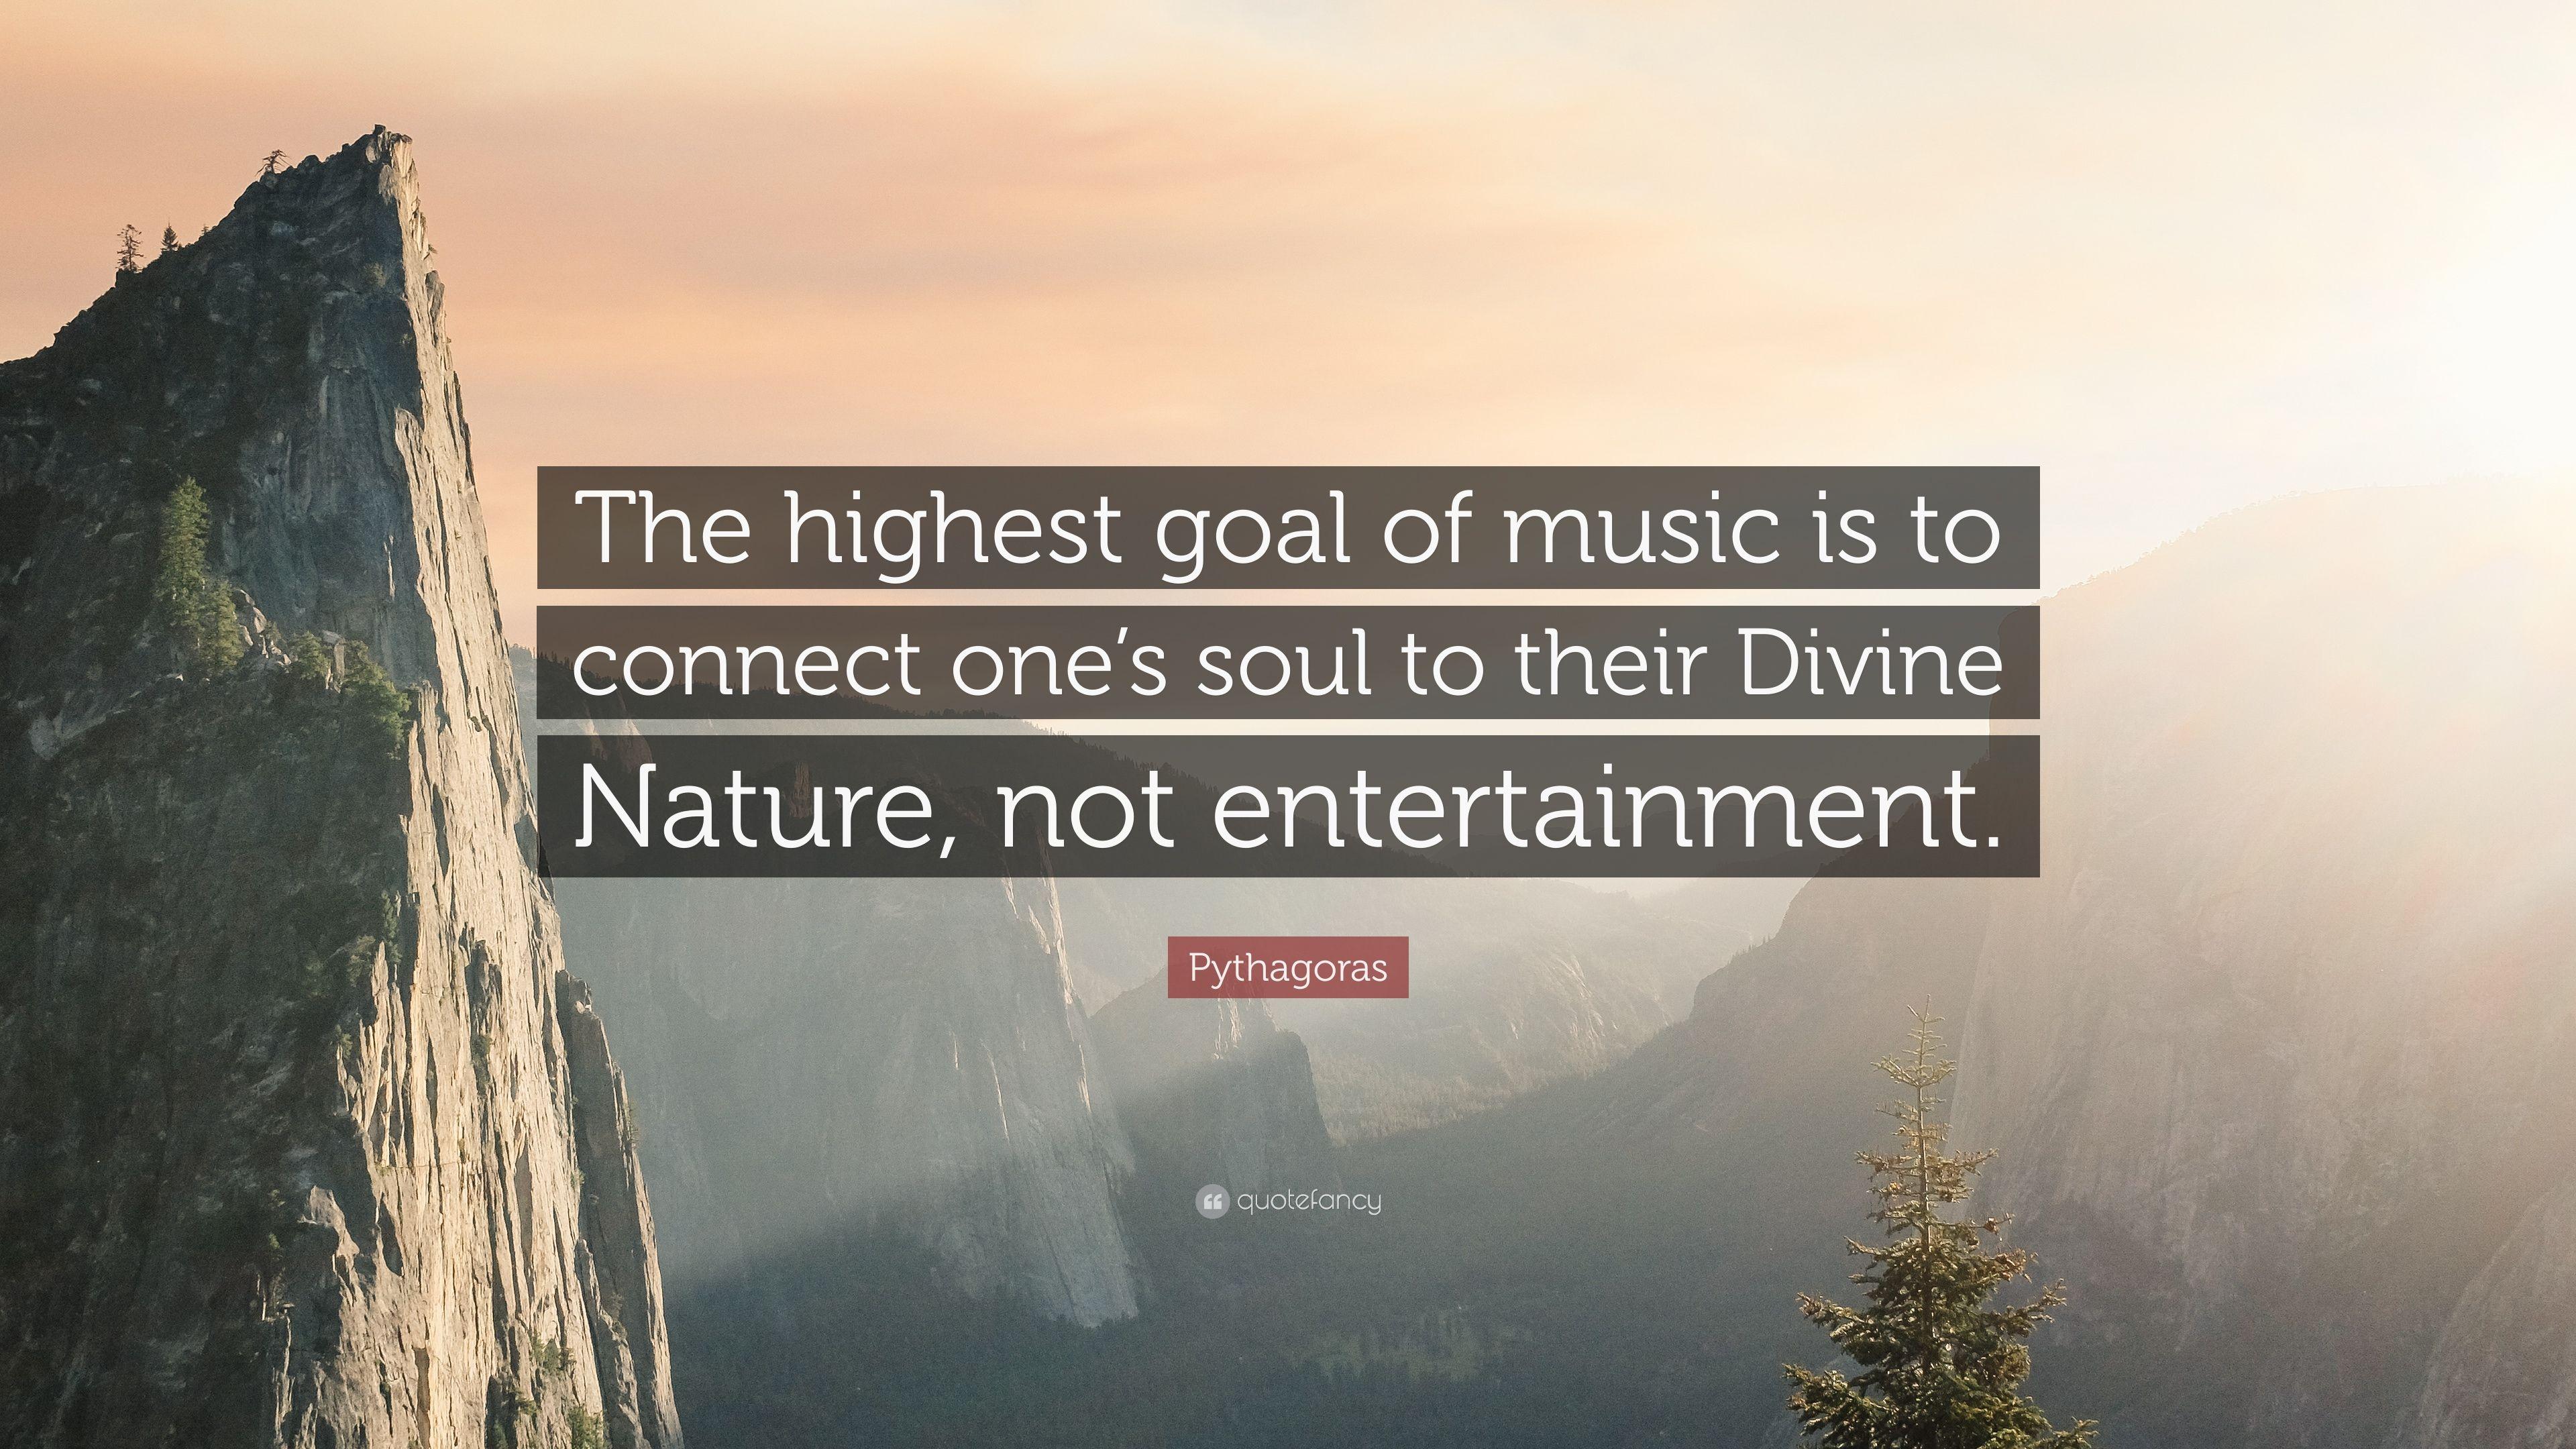 Pythagoras Quote: “The highest goal of music is to connect one's